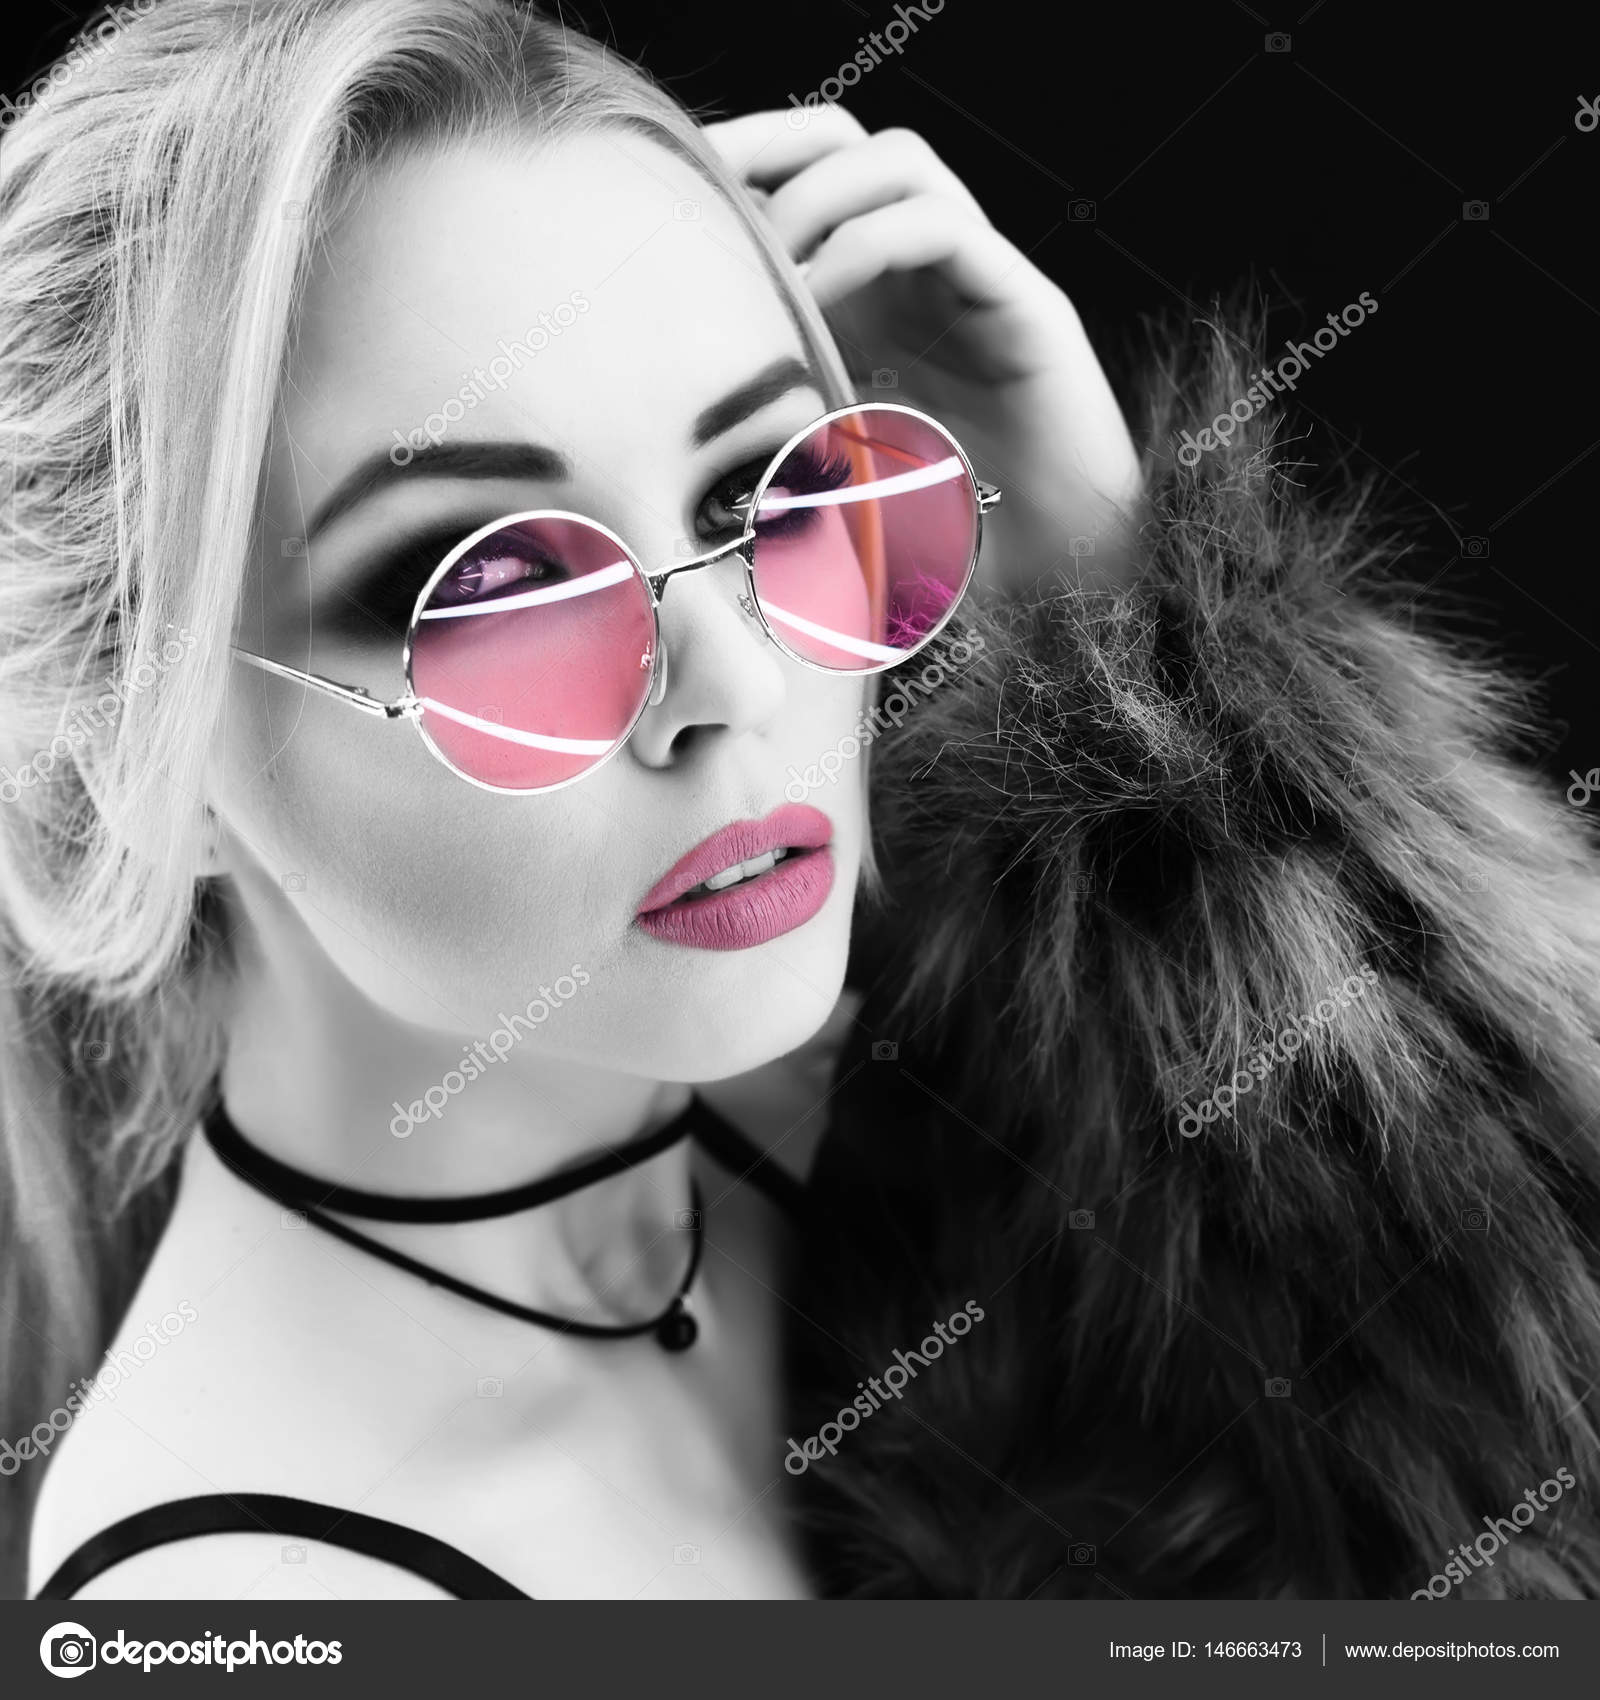 Beauty girl black and white portrait, wearing stylish sunglasses and choker. Sexy woman portrait with perfect makeup and and blonde hair style,trendy accessories. Beauty fashion trends Stock Photo ©NicoleClaudia